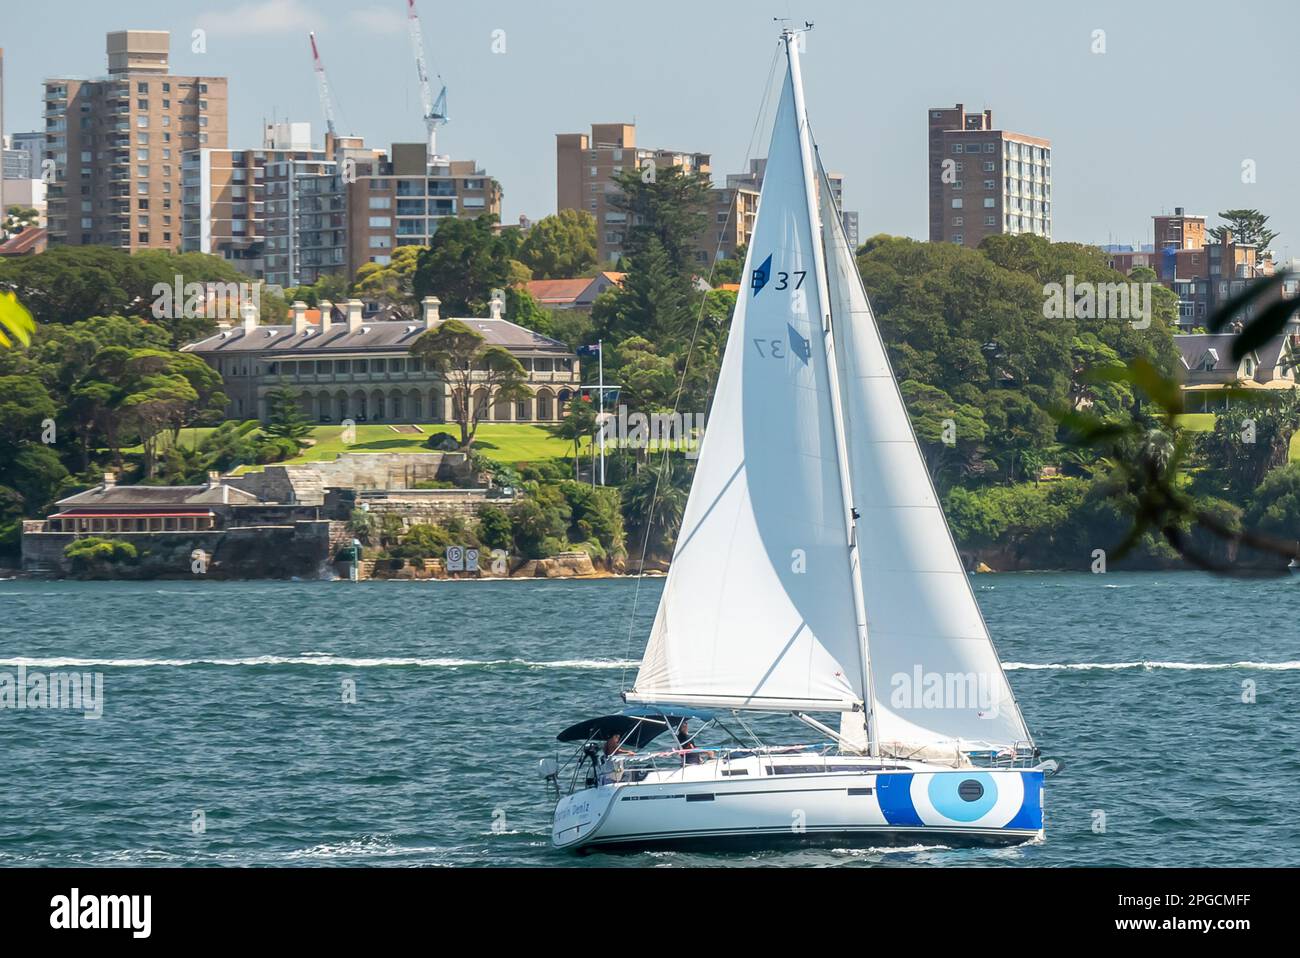 A sailing yacht from the Sydney Botanical Gardens Stock Photo